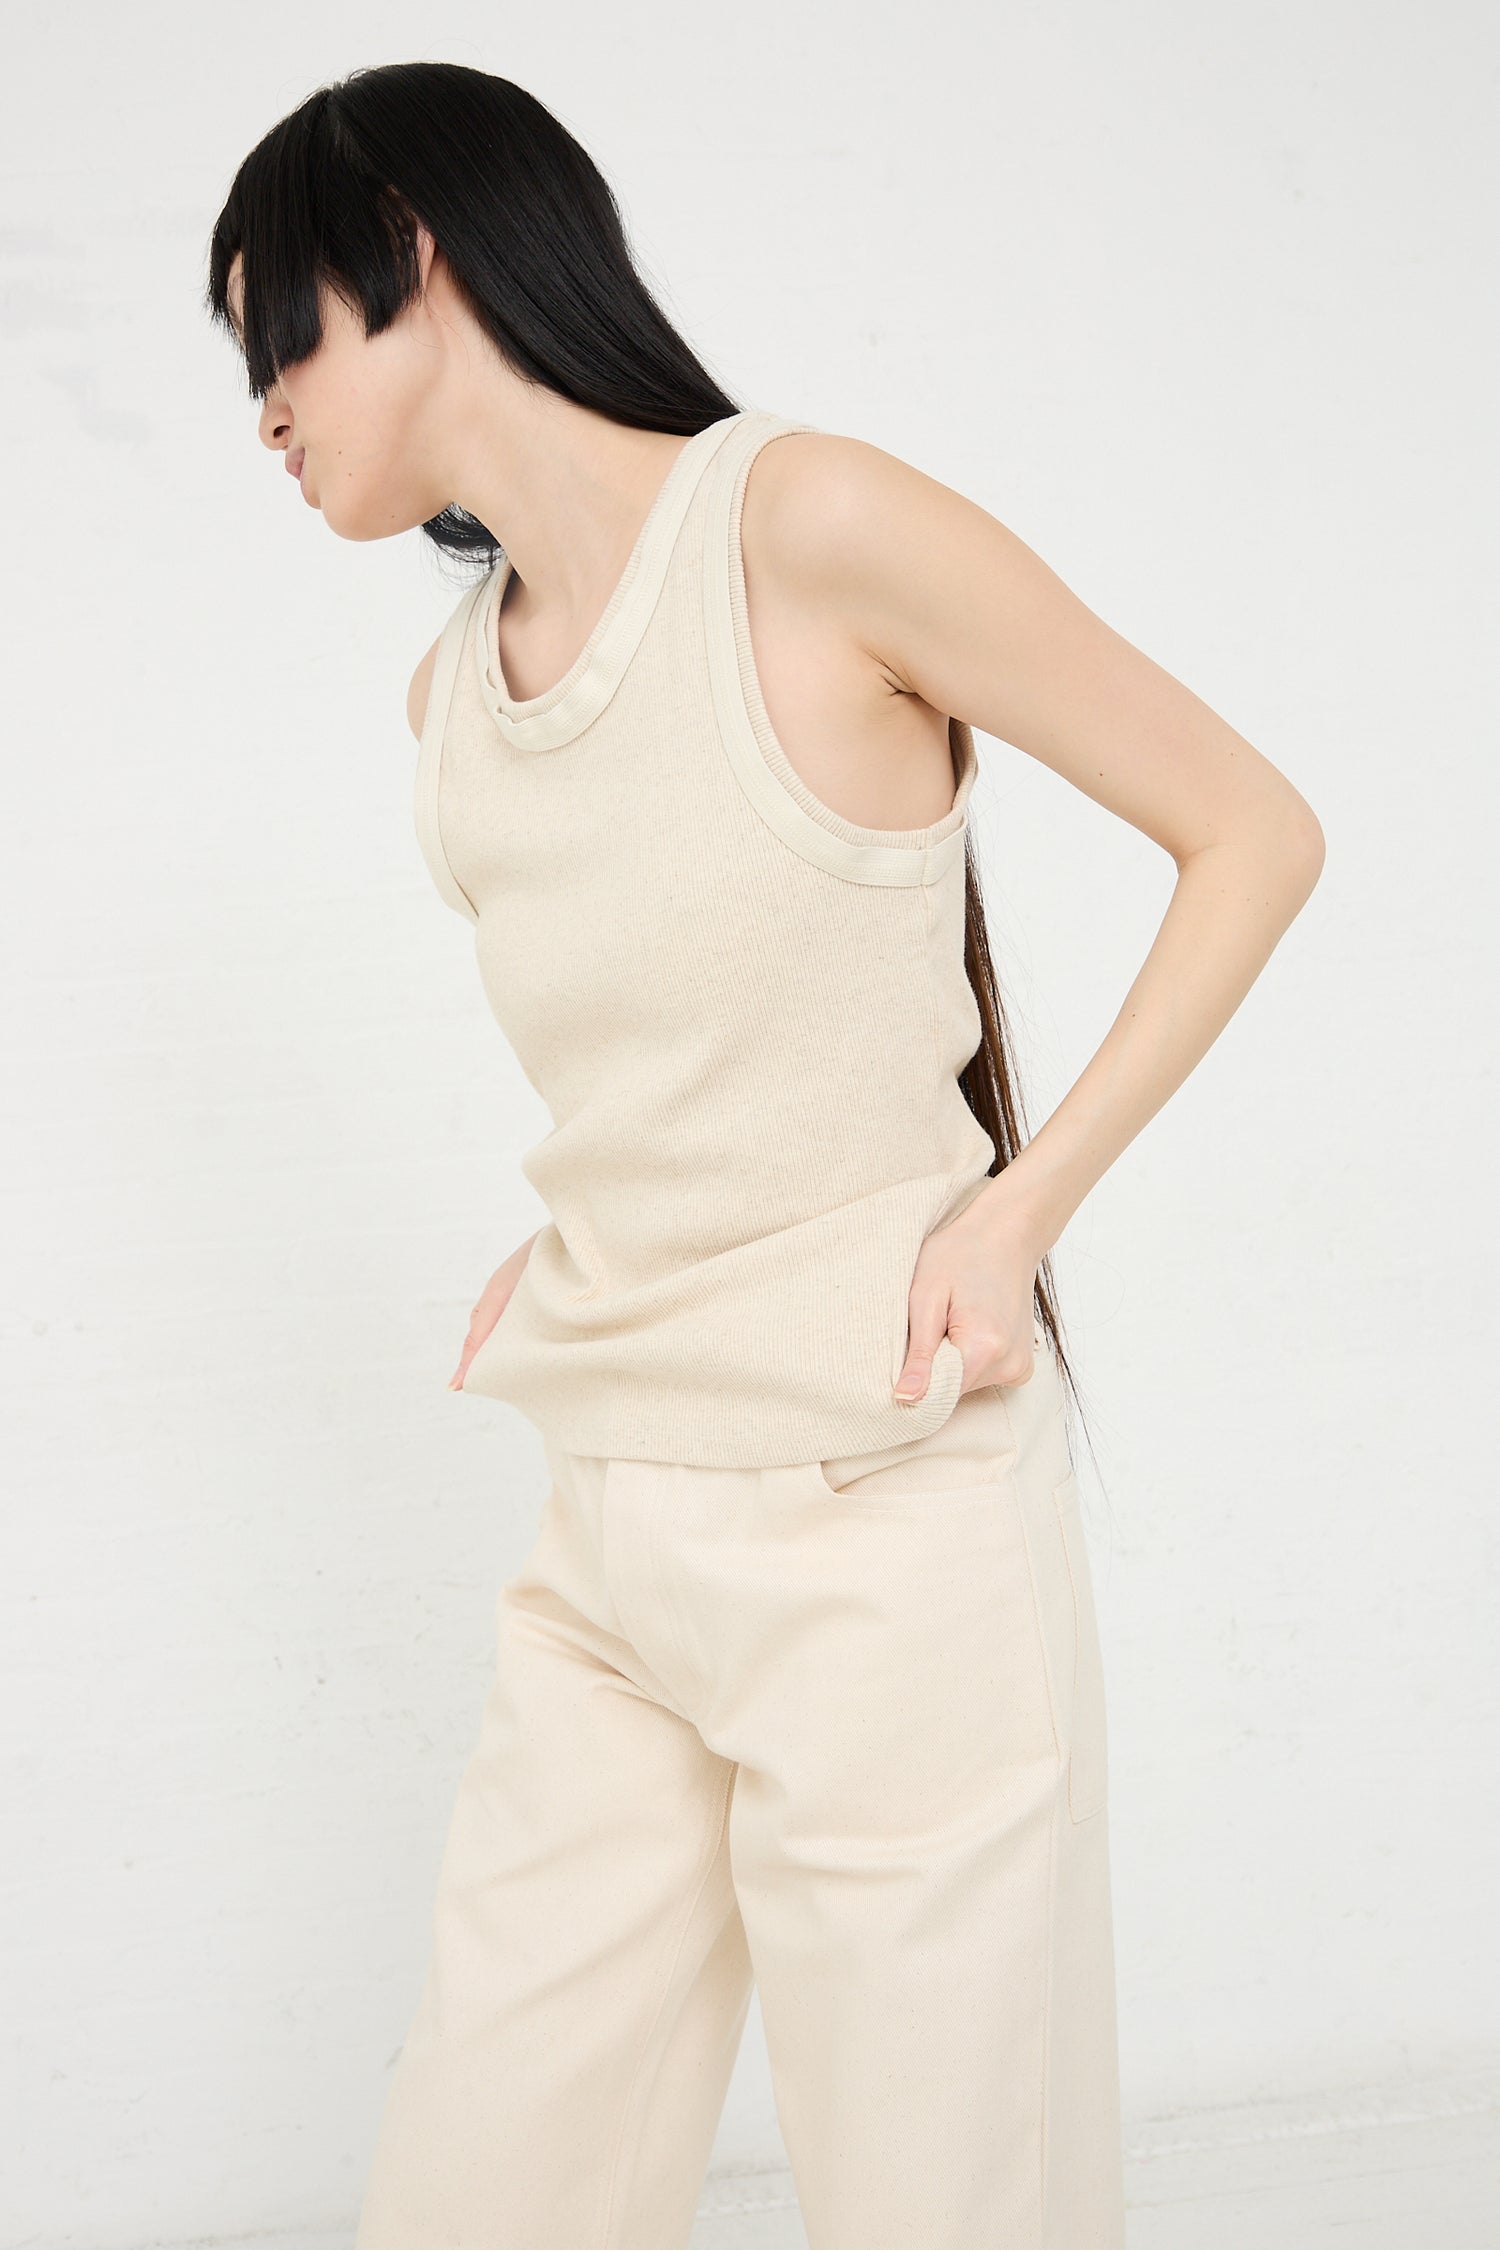 A woman with black hair wearing a beige Baserange Organic Cotton Hemp Rib Supple Tank in Undyed and pants stands in a profile pose against a white background.